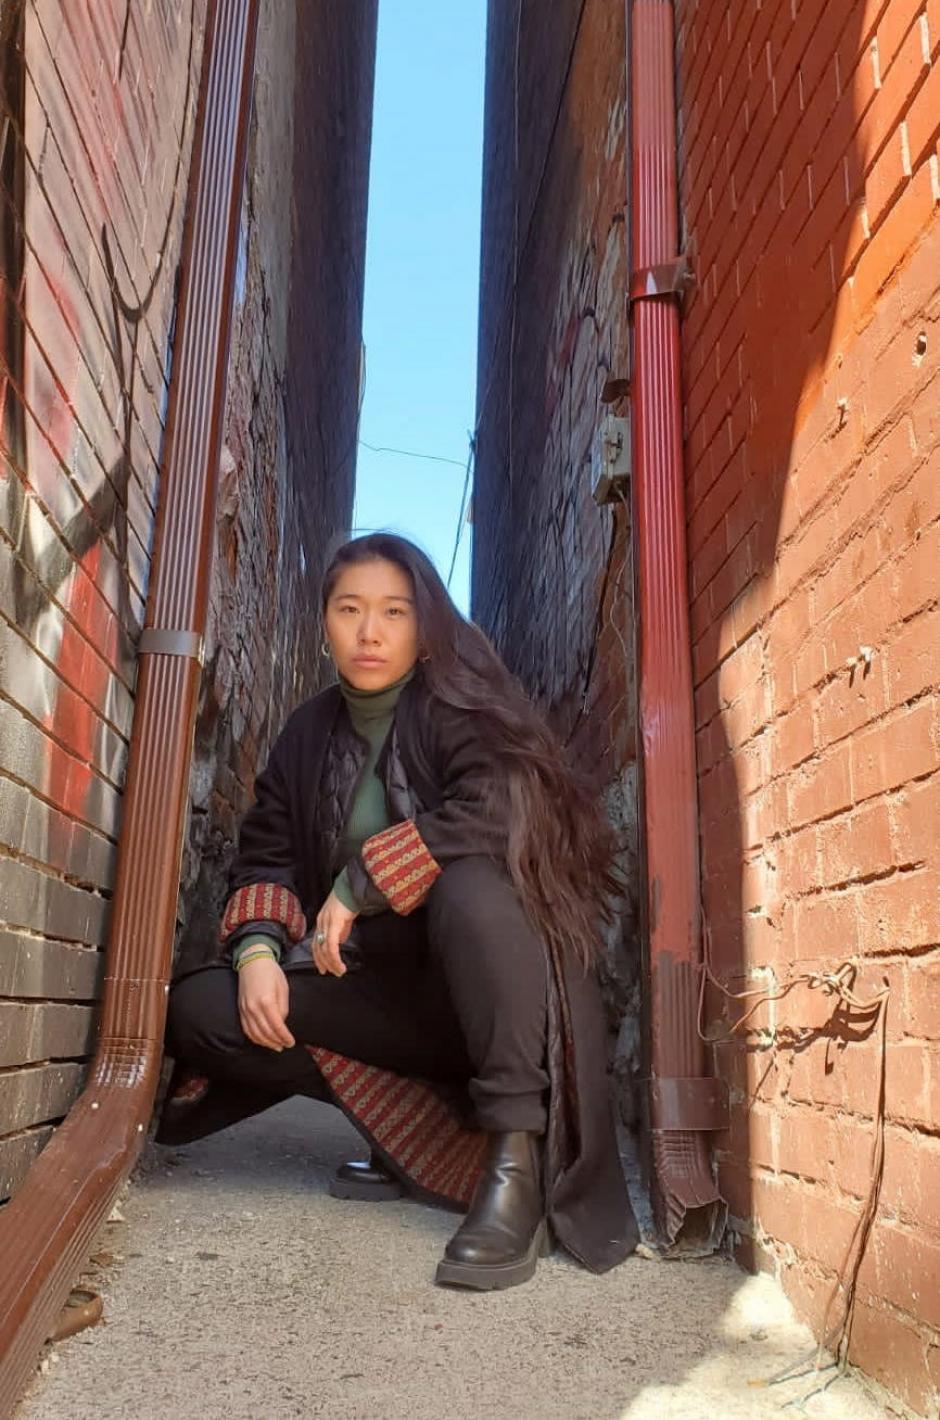 Rinchen Dolma is crouching down on a narrow sidewalk between two red brick walls marked with graffiti